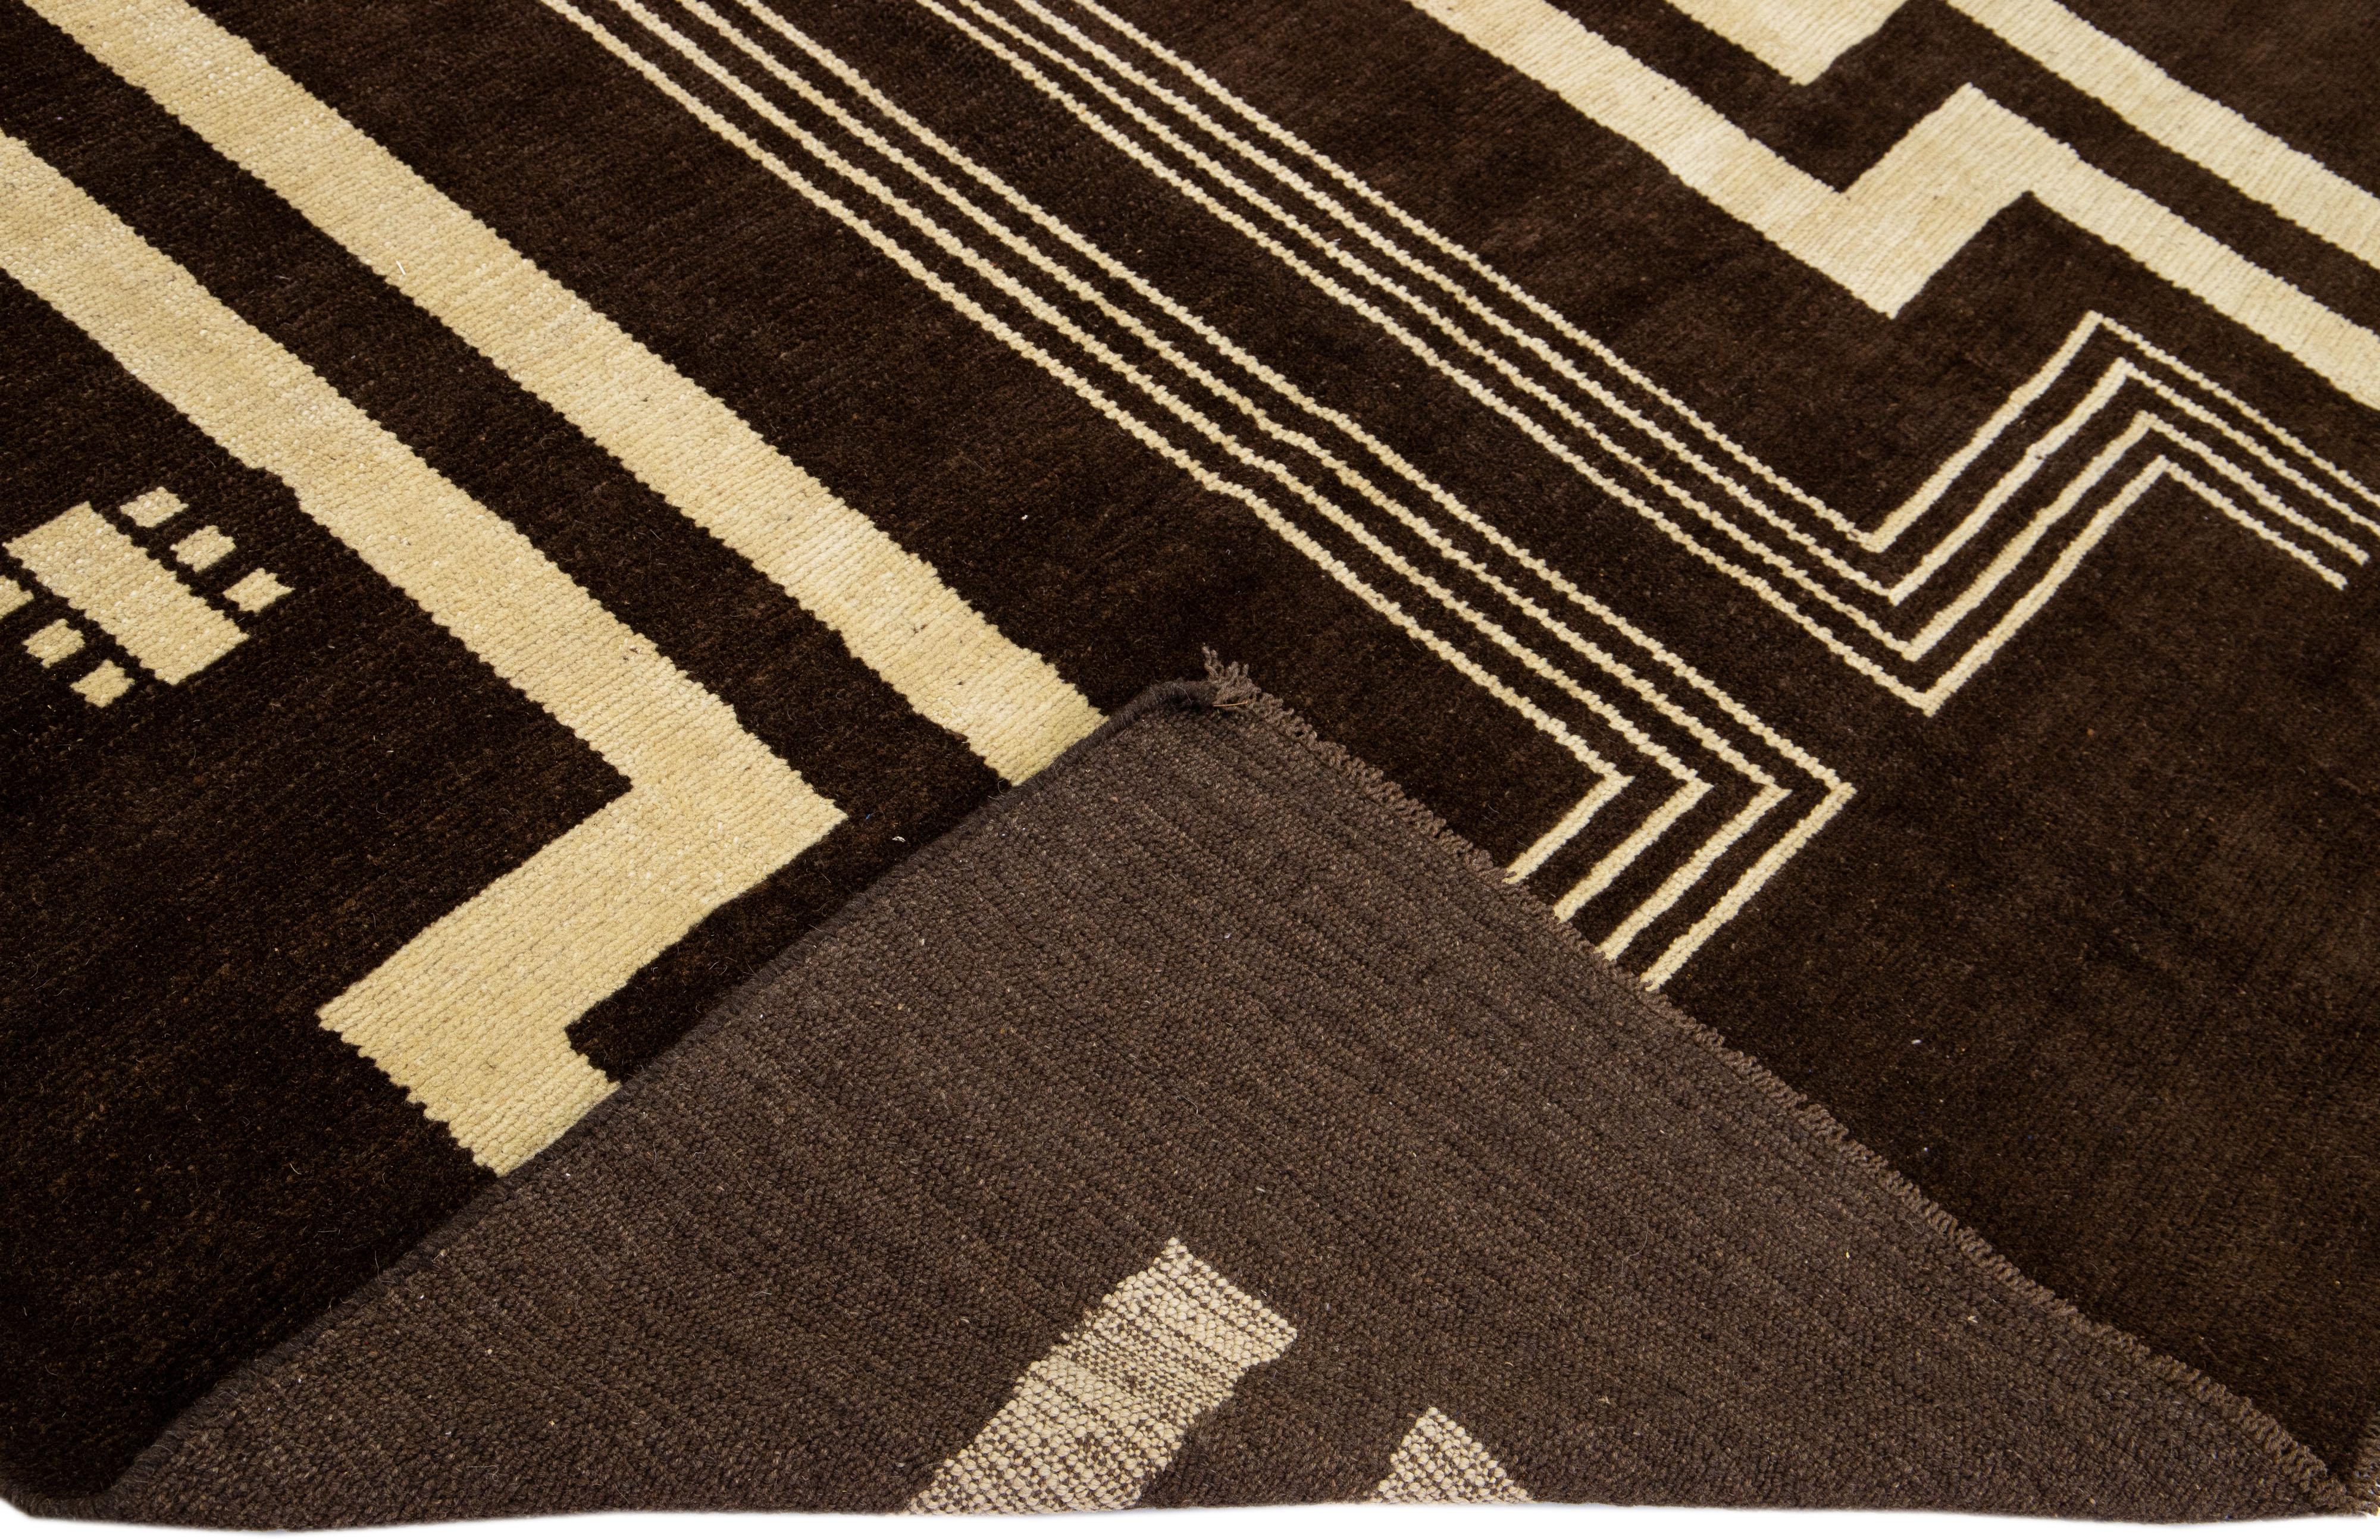 This Beautiful Modern Art Deco handmade wool rug makes part of our Northwest collection and features a dark brown color field and beige accents in a gorgeous geometric tribal design.

This rug measures: 7' x 9'.

Our rugs are professional